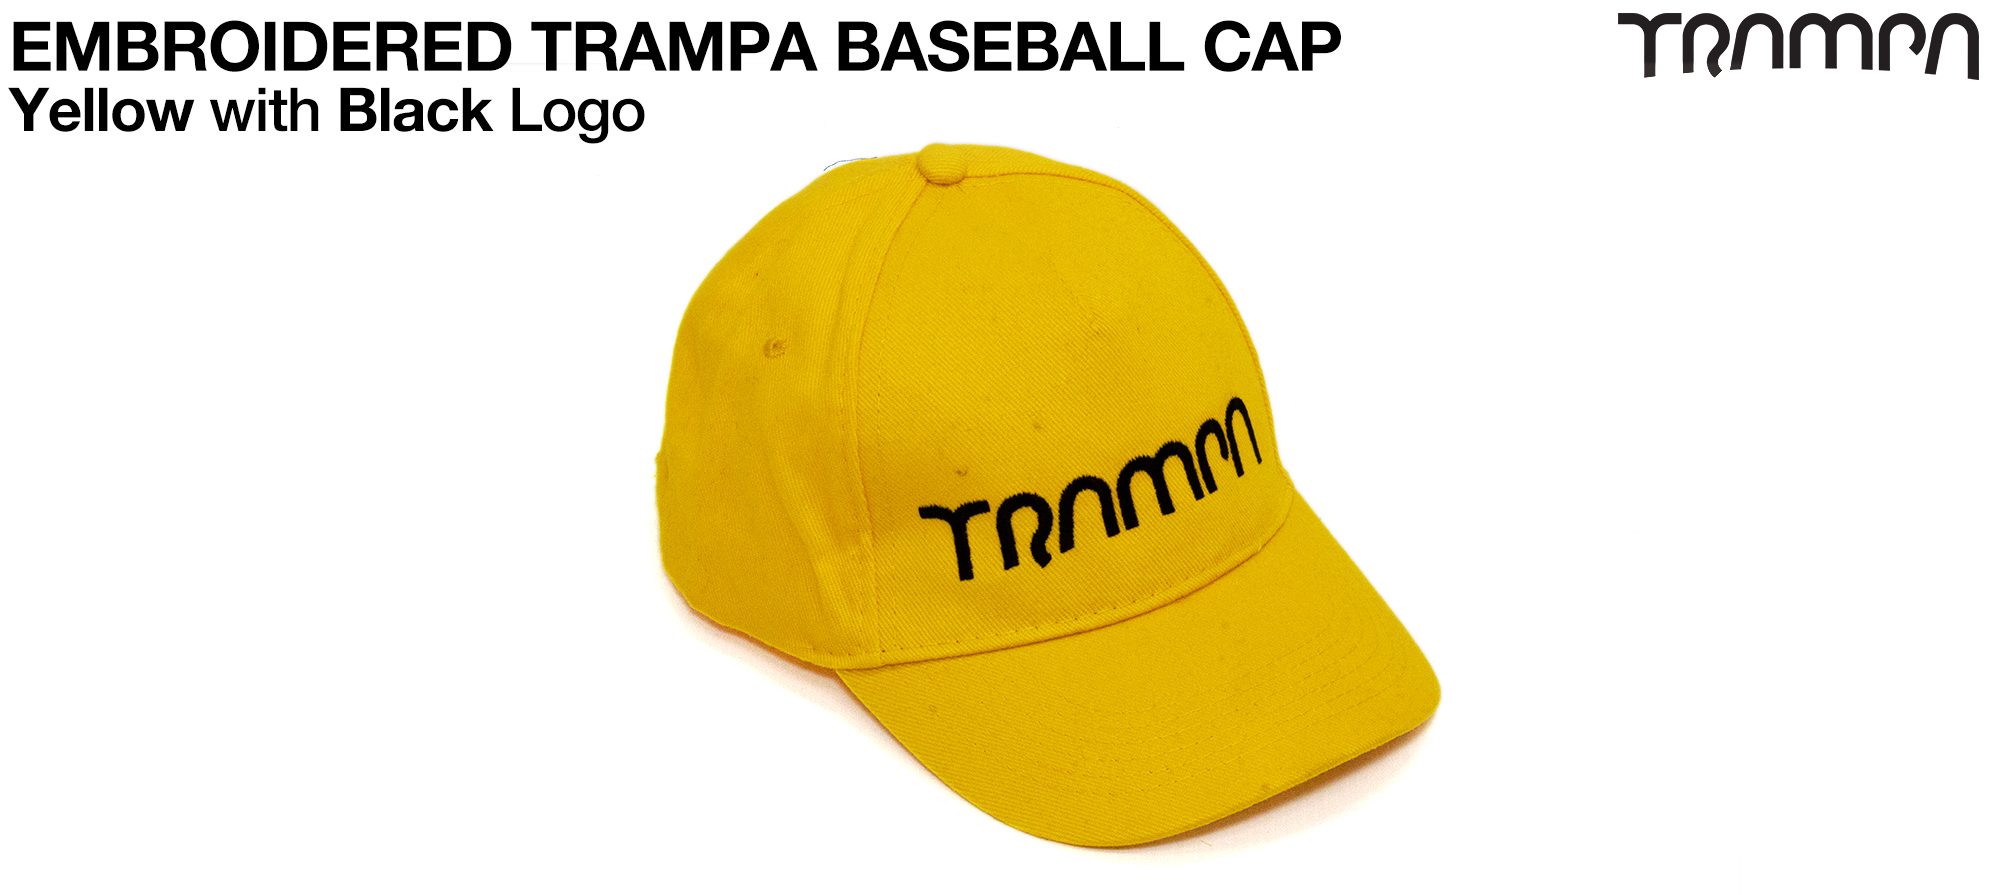 YELLOW Baseball Cap with BLACK logo embroidered